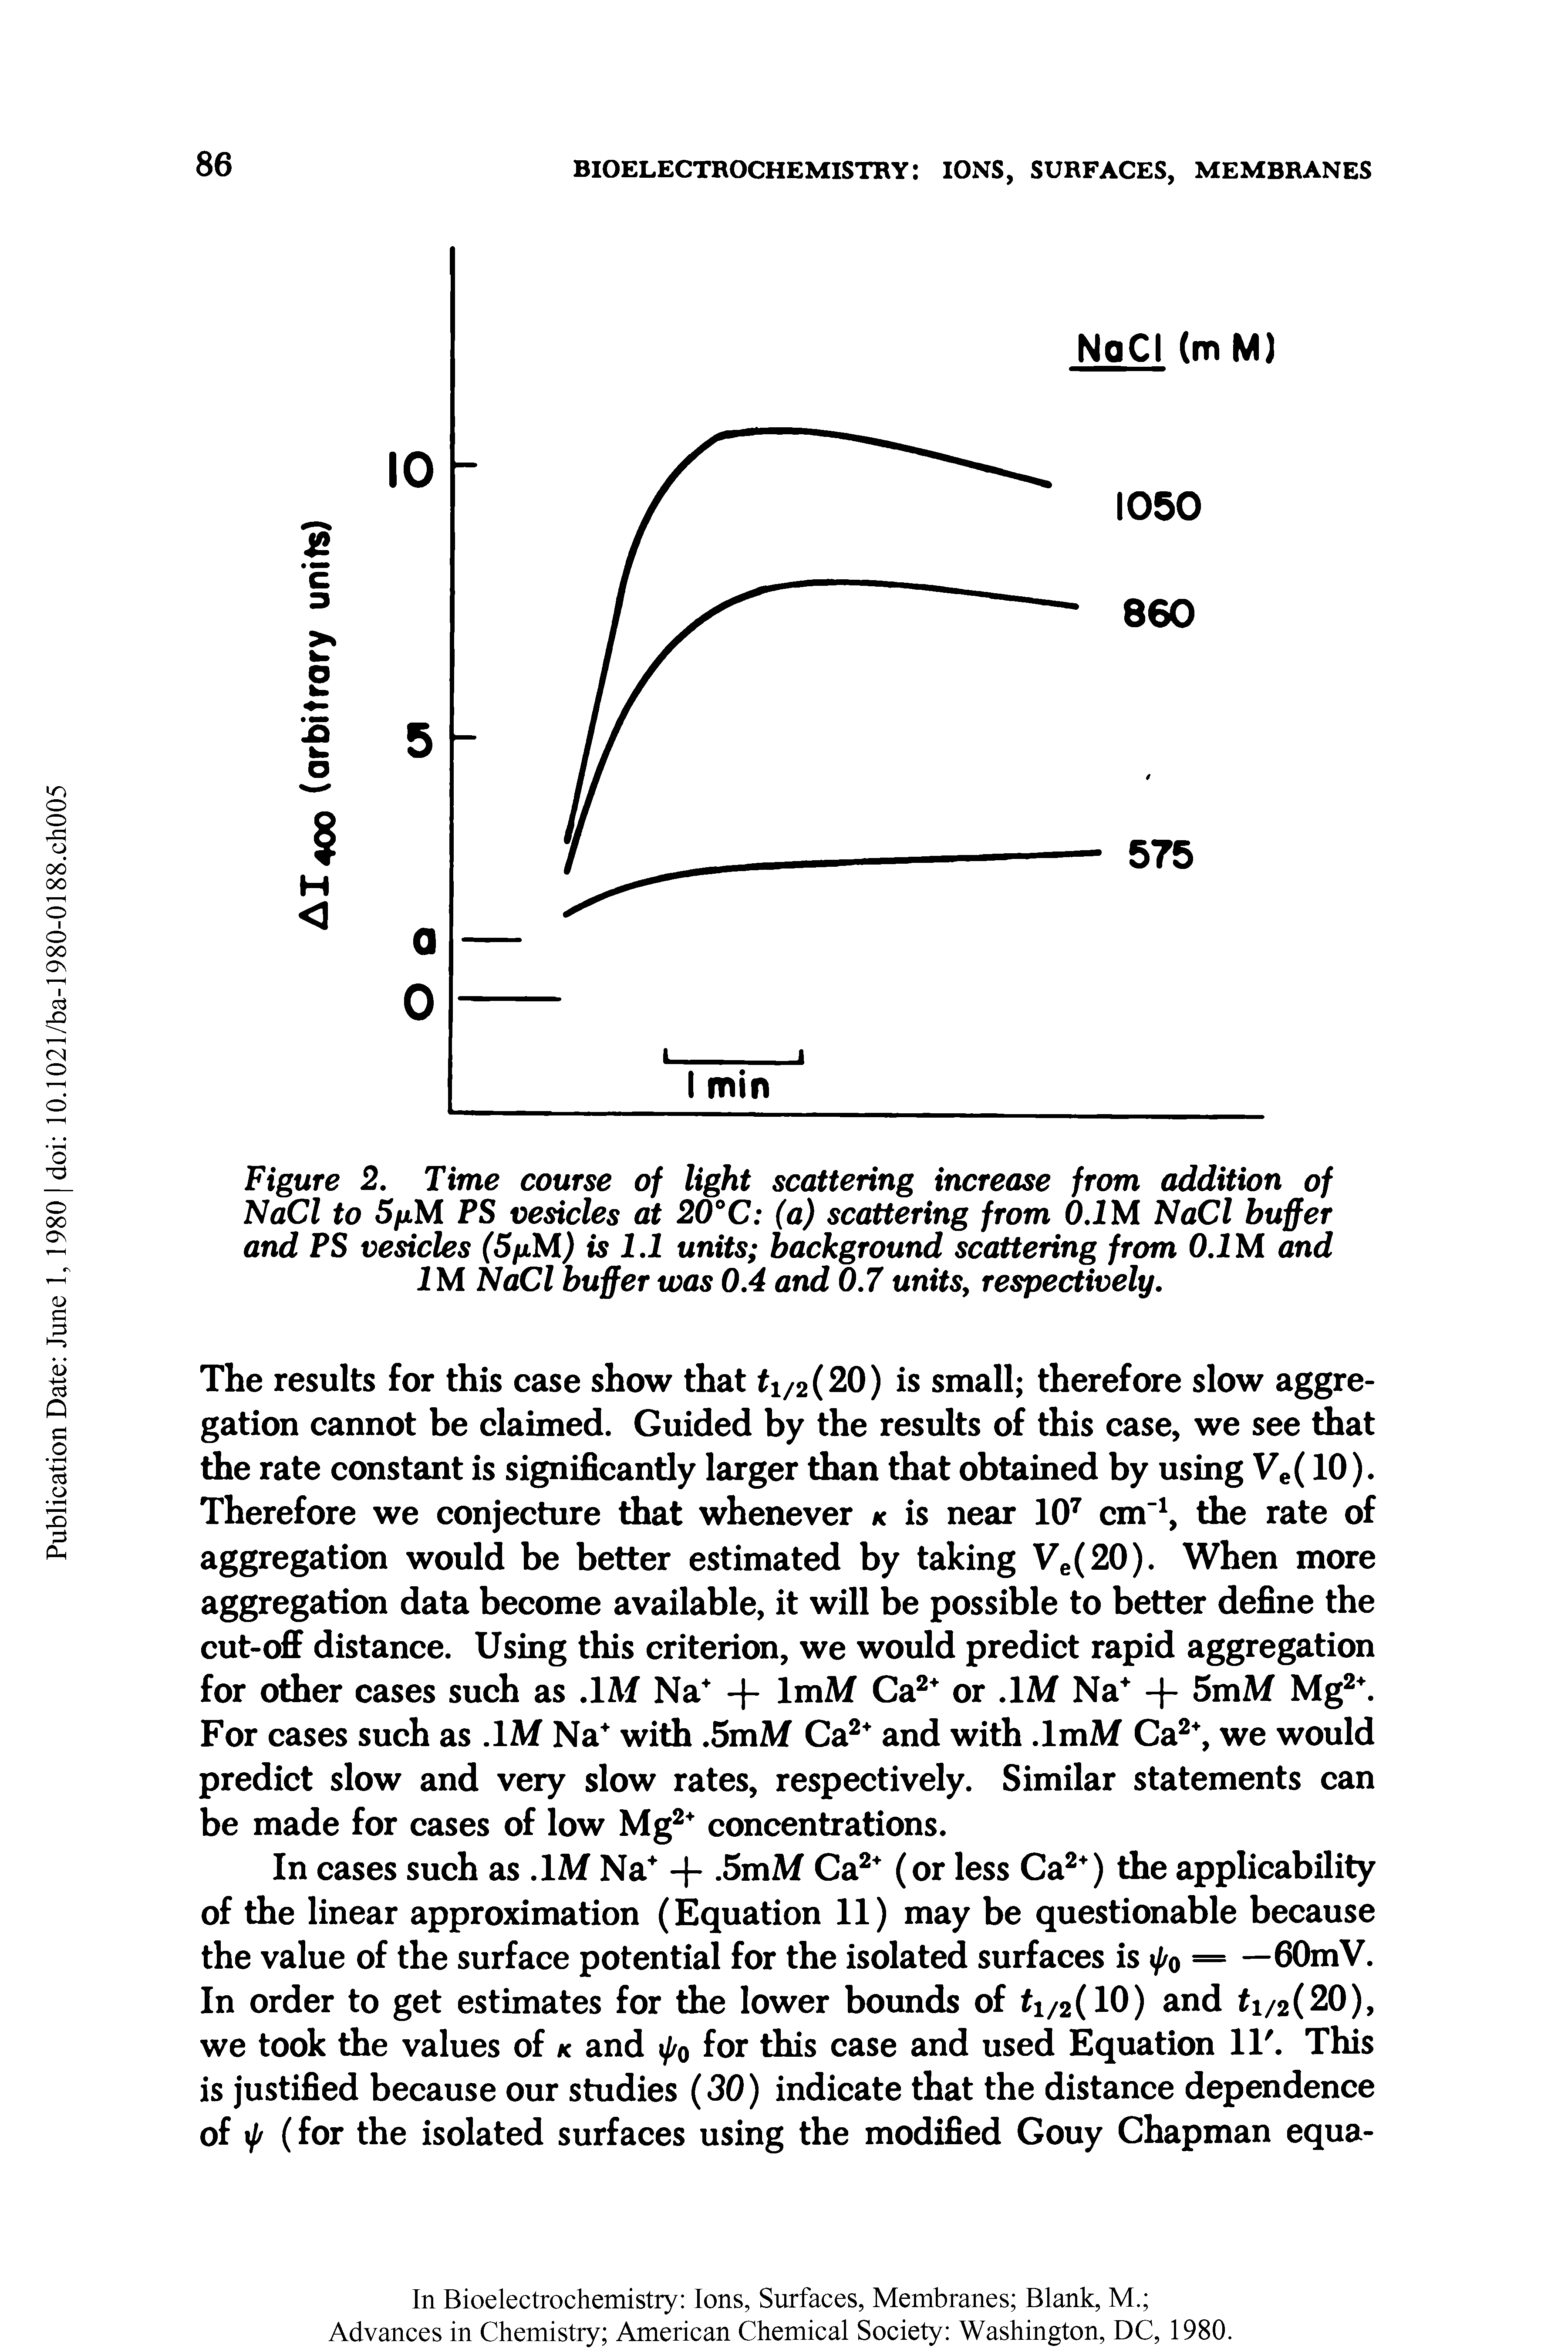 Figure 2. Time course of light scattering increase from addition of NaCl to 5fiM PS vesicles at 20°C (a) scattering from 0.1 M NaCl buffer and PS vesicles (SfiM) is 1.1 units background scattering from 0.1M and IM NaCl buffer was 0.4 and 0.7 units, respectively.